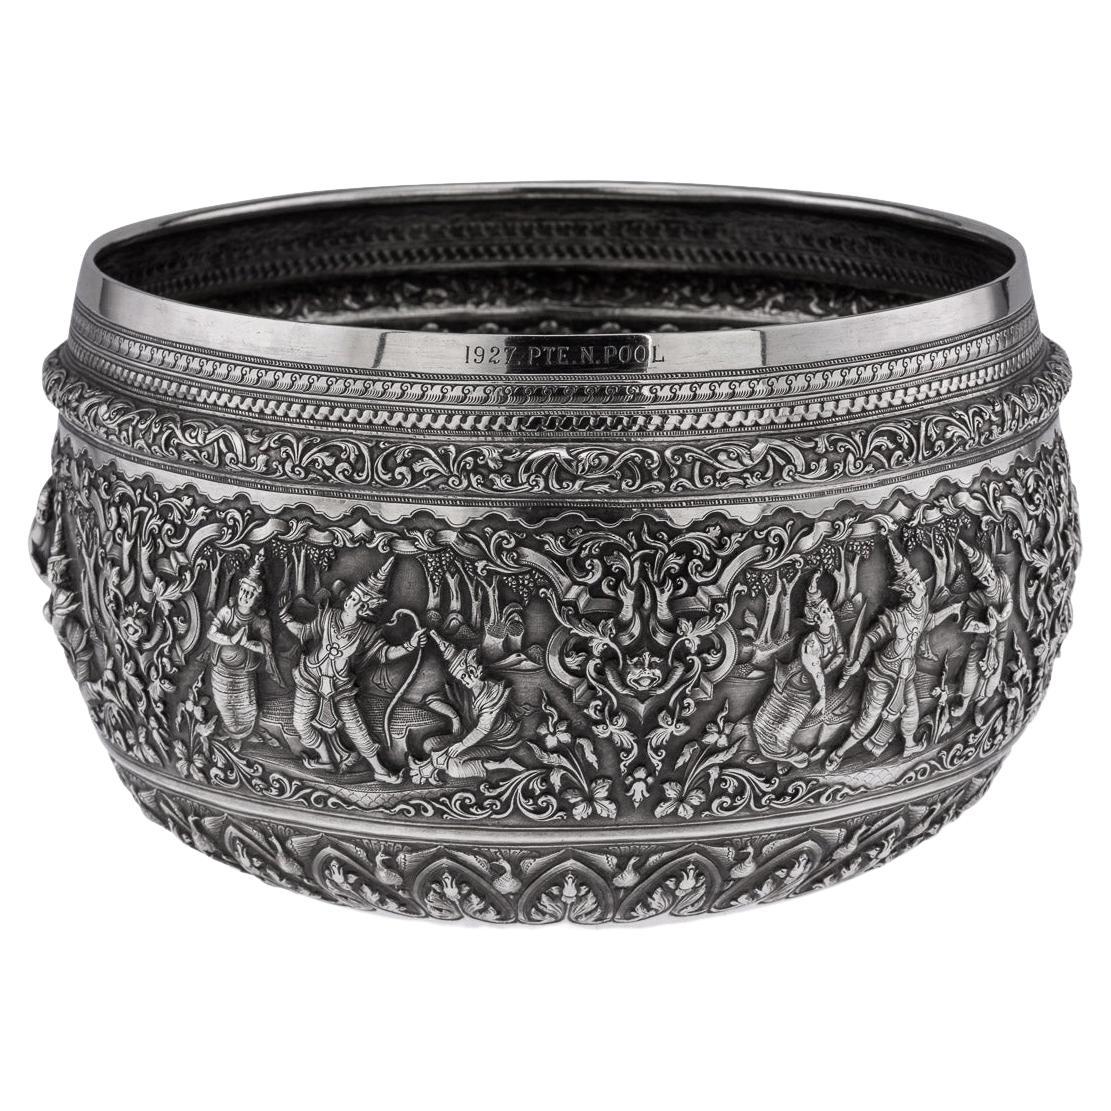 20th Century Exceptional Burmese Solid Silver Hand Crafted Bowl, c.1900